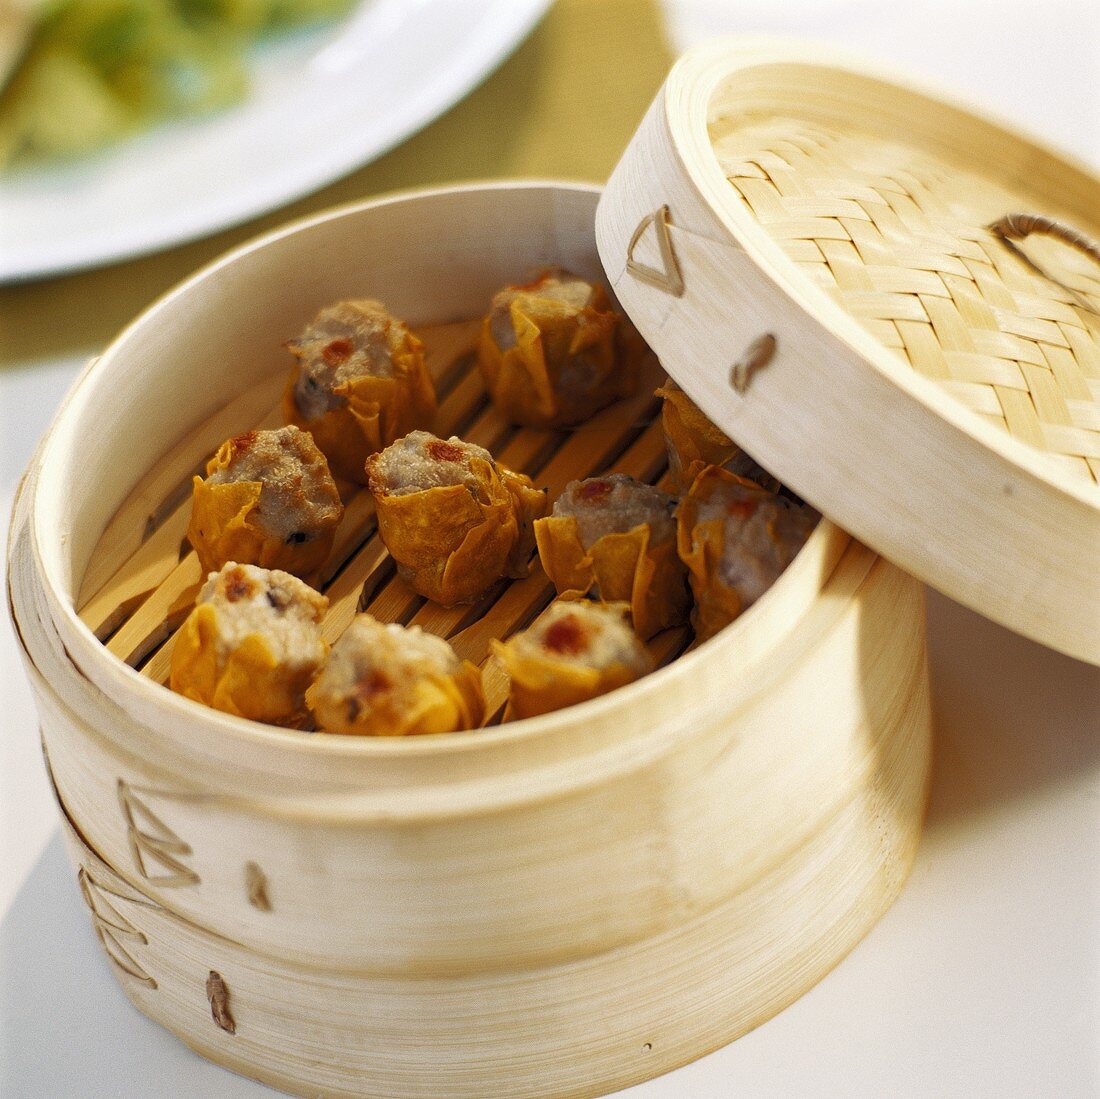 Appetisers in bamboo basket